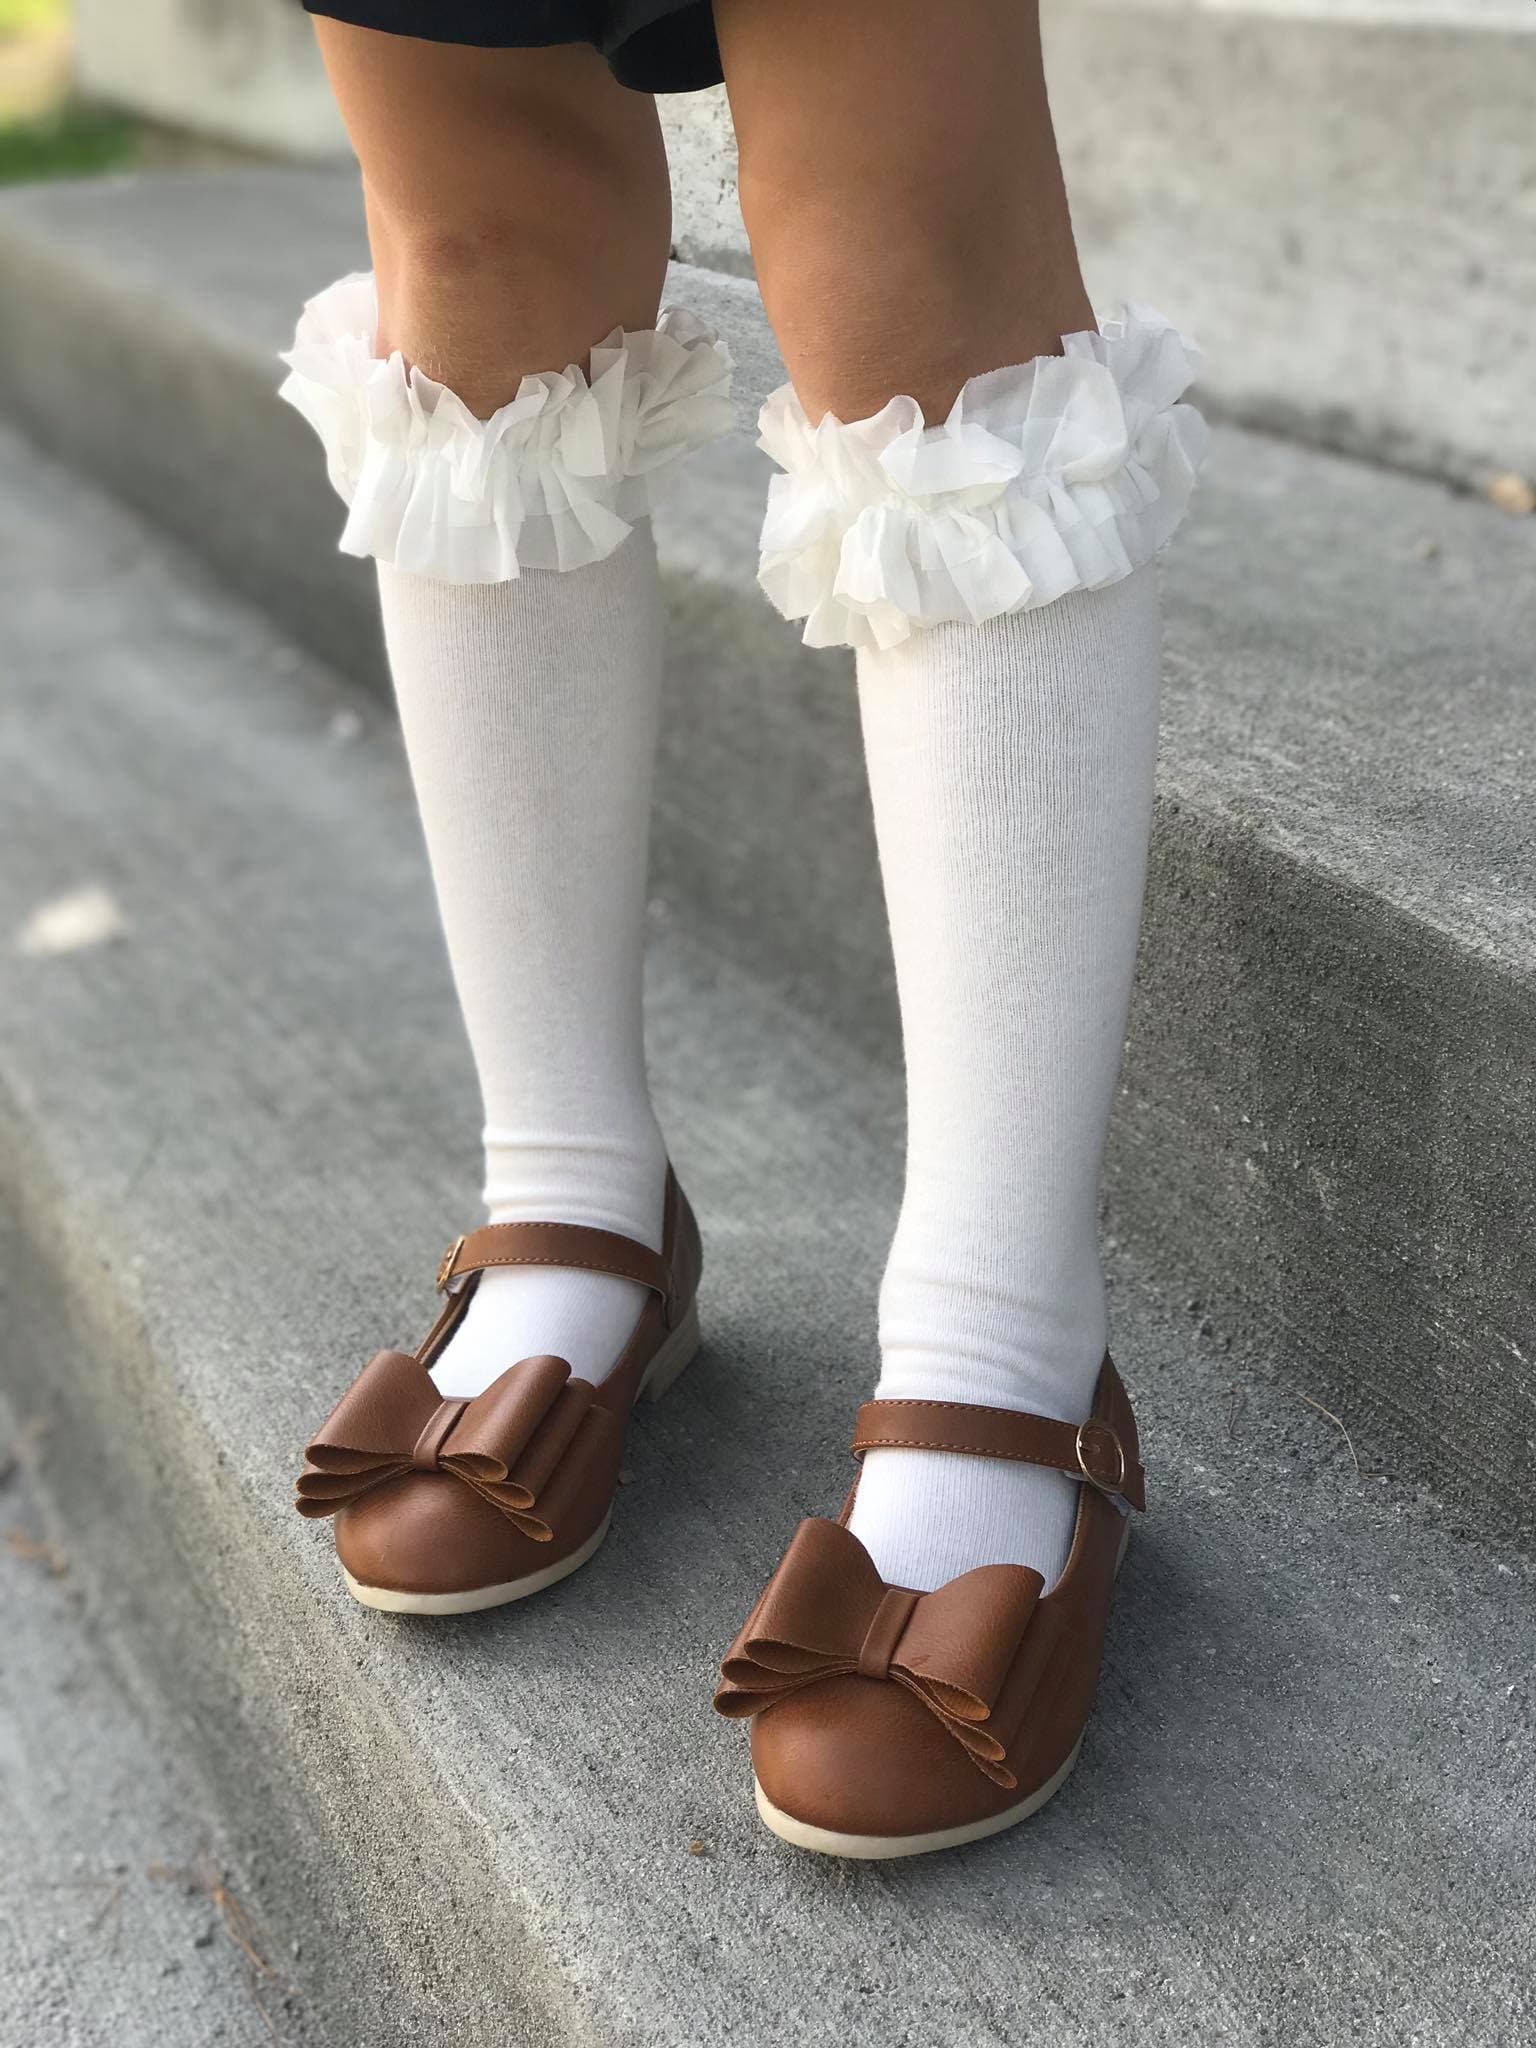 [Off White w/ Tulle Ruffle] Tall Socks